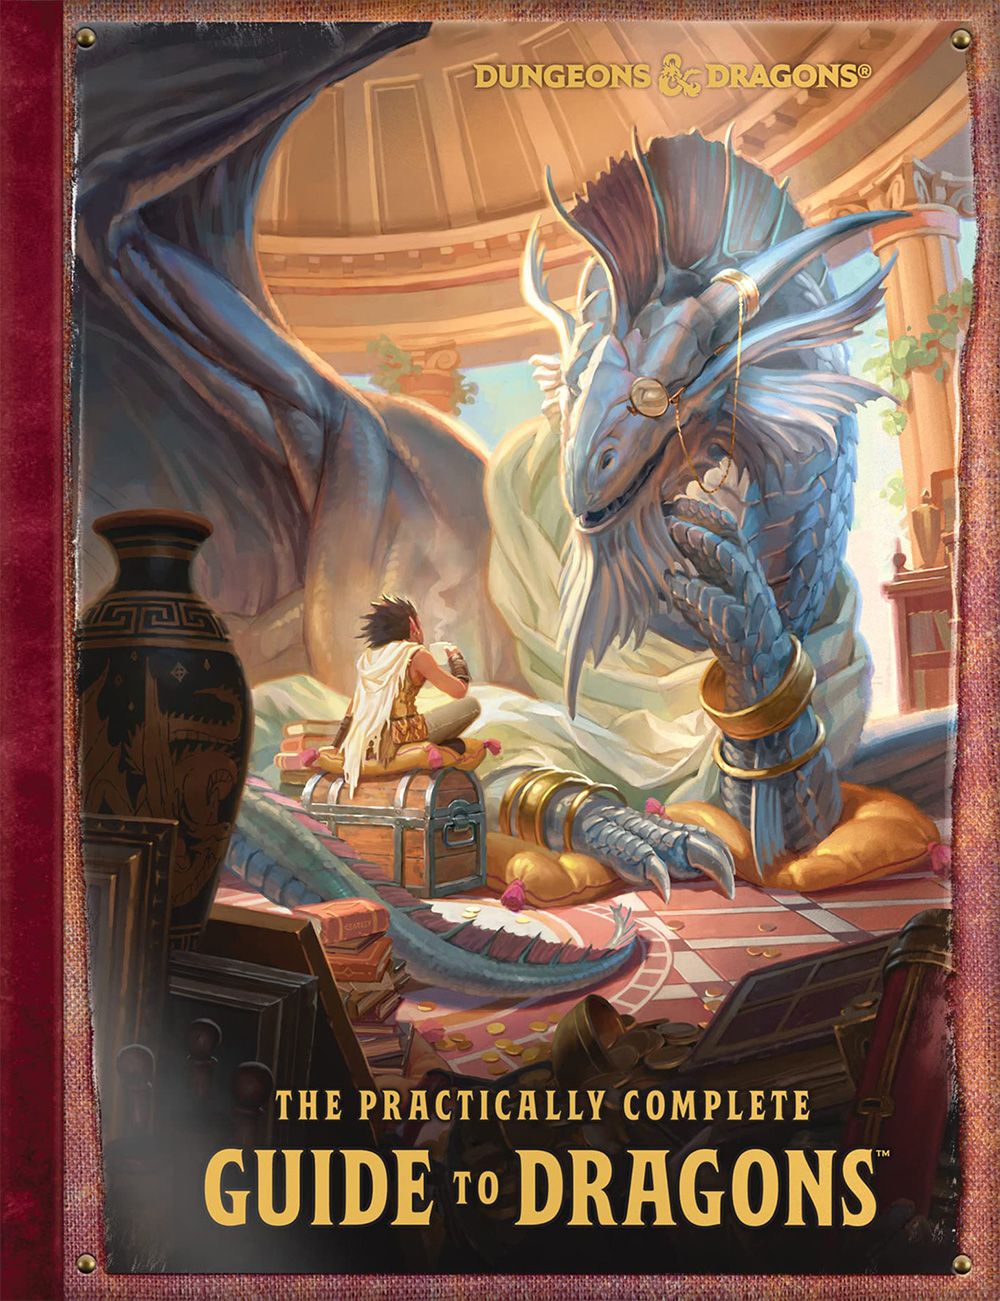 Dungeons & Dragons - The Practically Complete Guide to Dragons - Hardcover